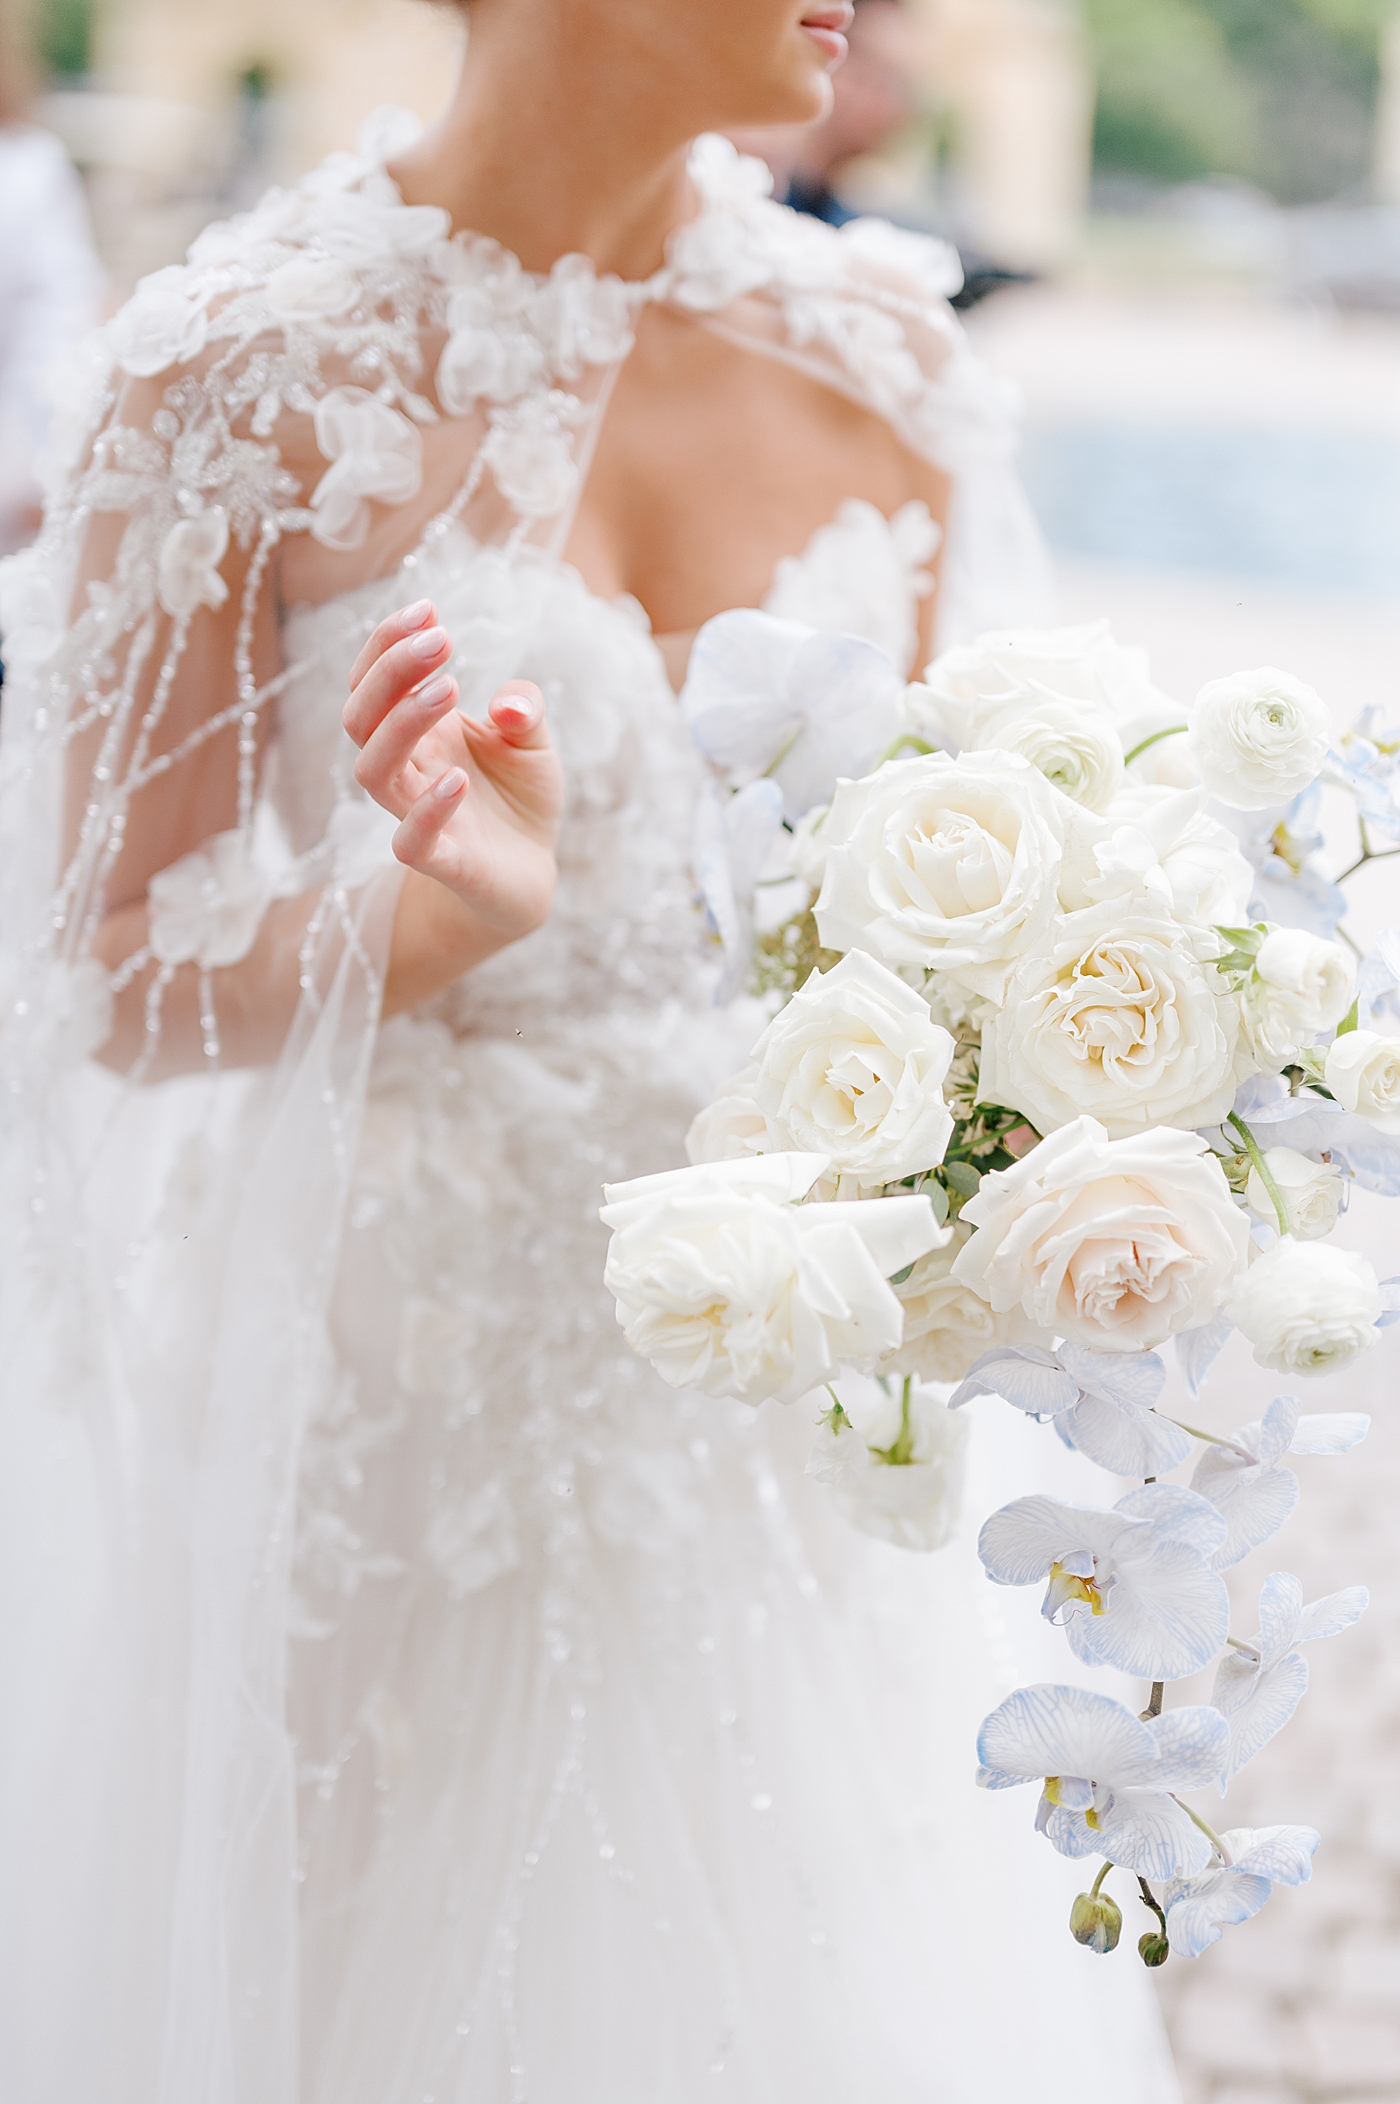 Bride holding her bouquet | Image by Hope Helmuth Photography